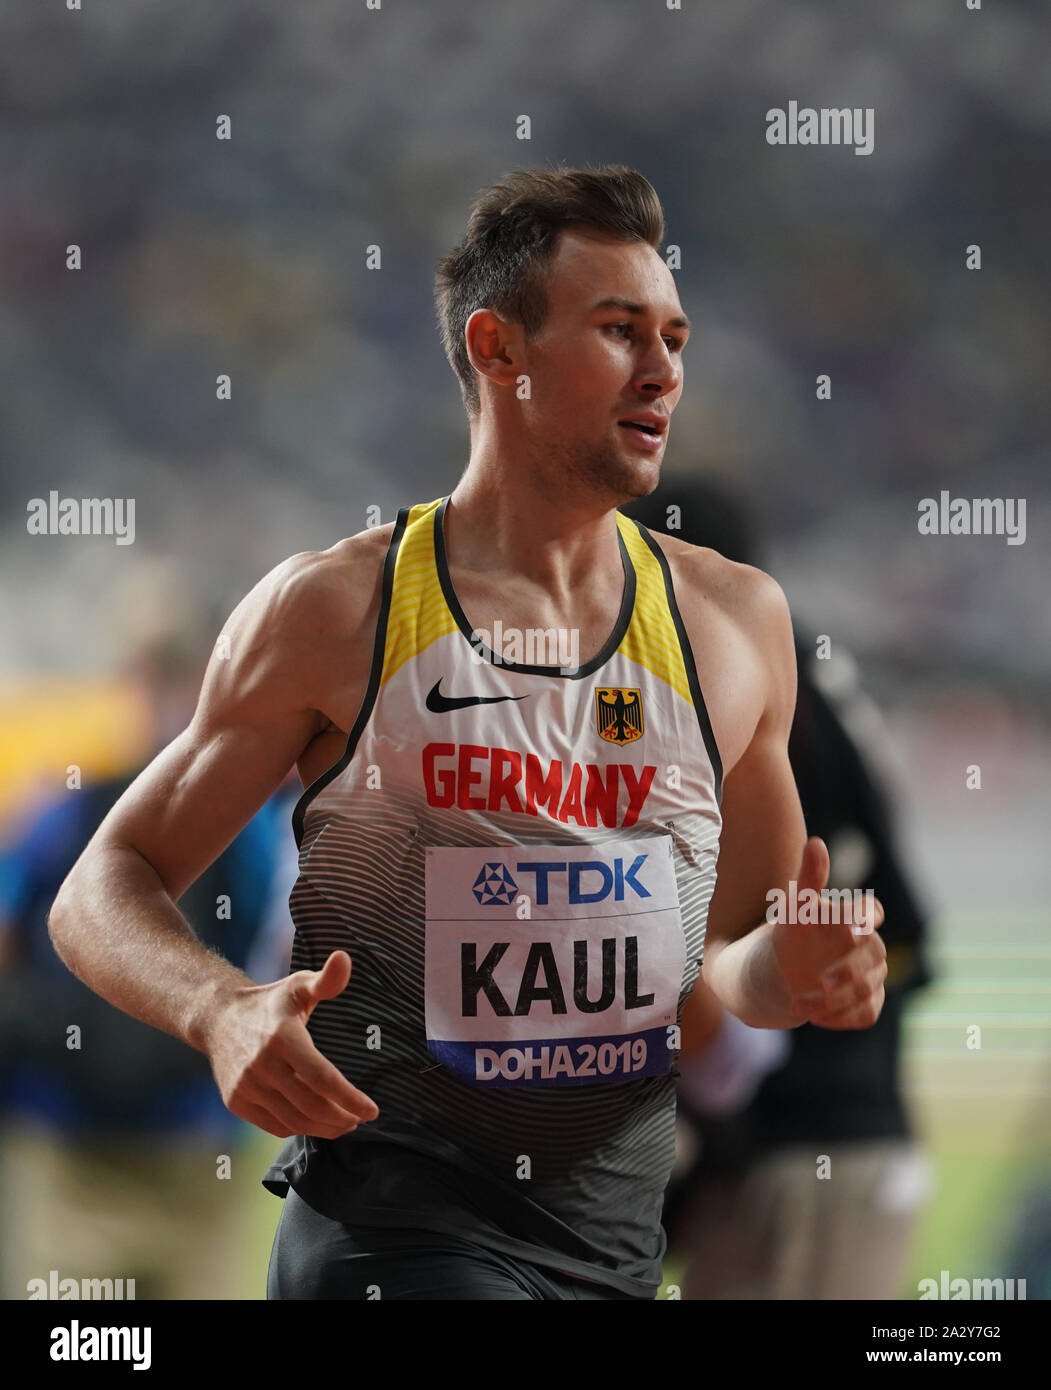 Doha, Qatar. 3rd Oct, 2019. Niklas Kaul of Germany competes during the 1500m event of men's decathlon at the 2019 IAAF World Athletics Championships in Doha, Qatar, . Credit: Jia Yuchen/Xinhua/Alamy Live News Stock Photo